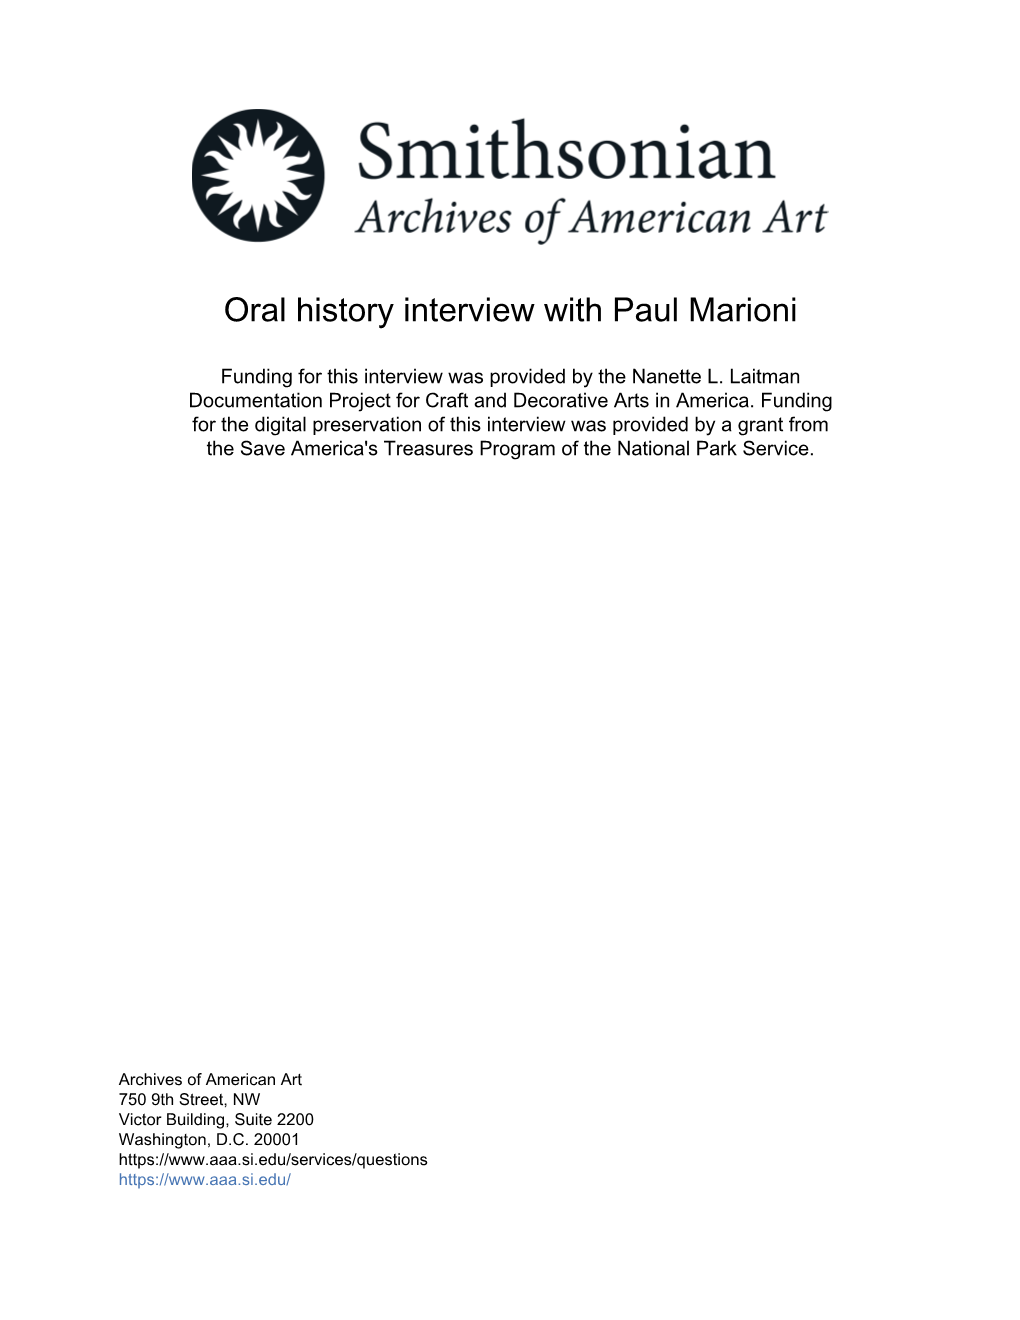 Oral History Interview with Paul Marioni